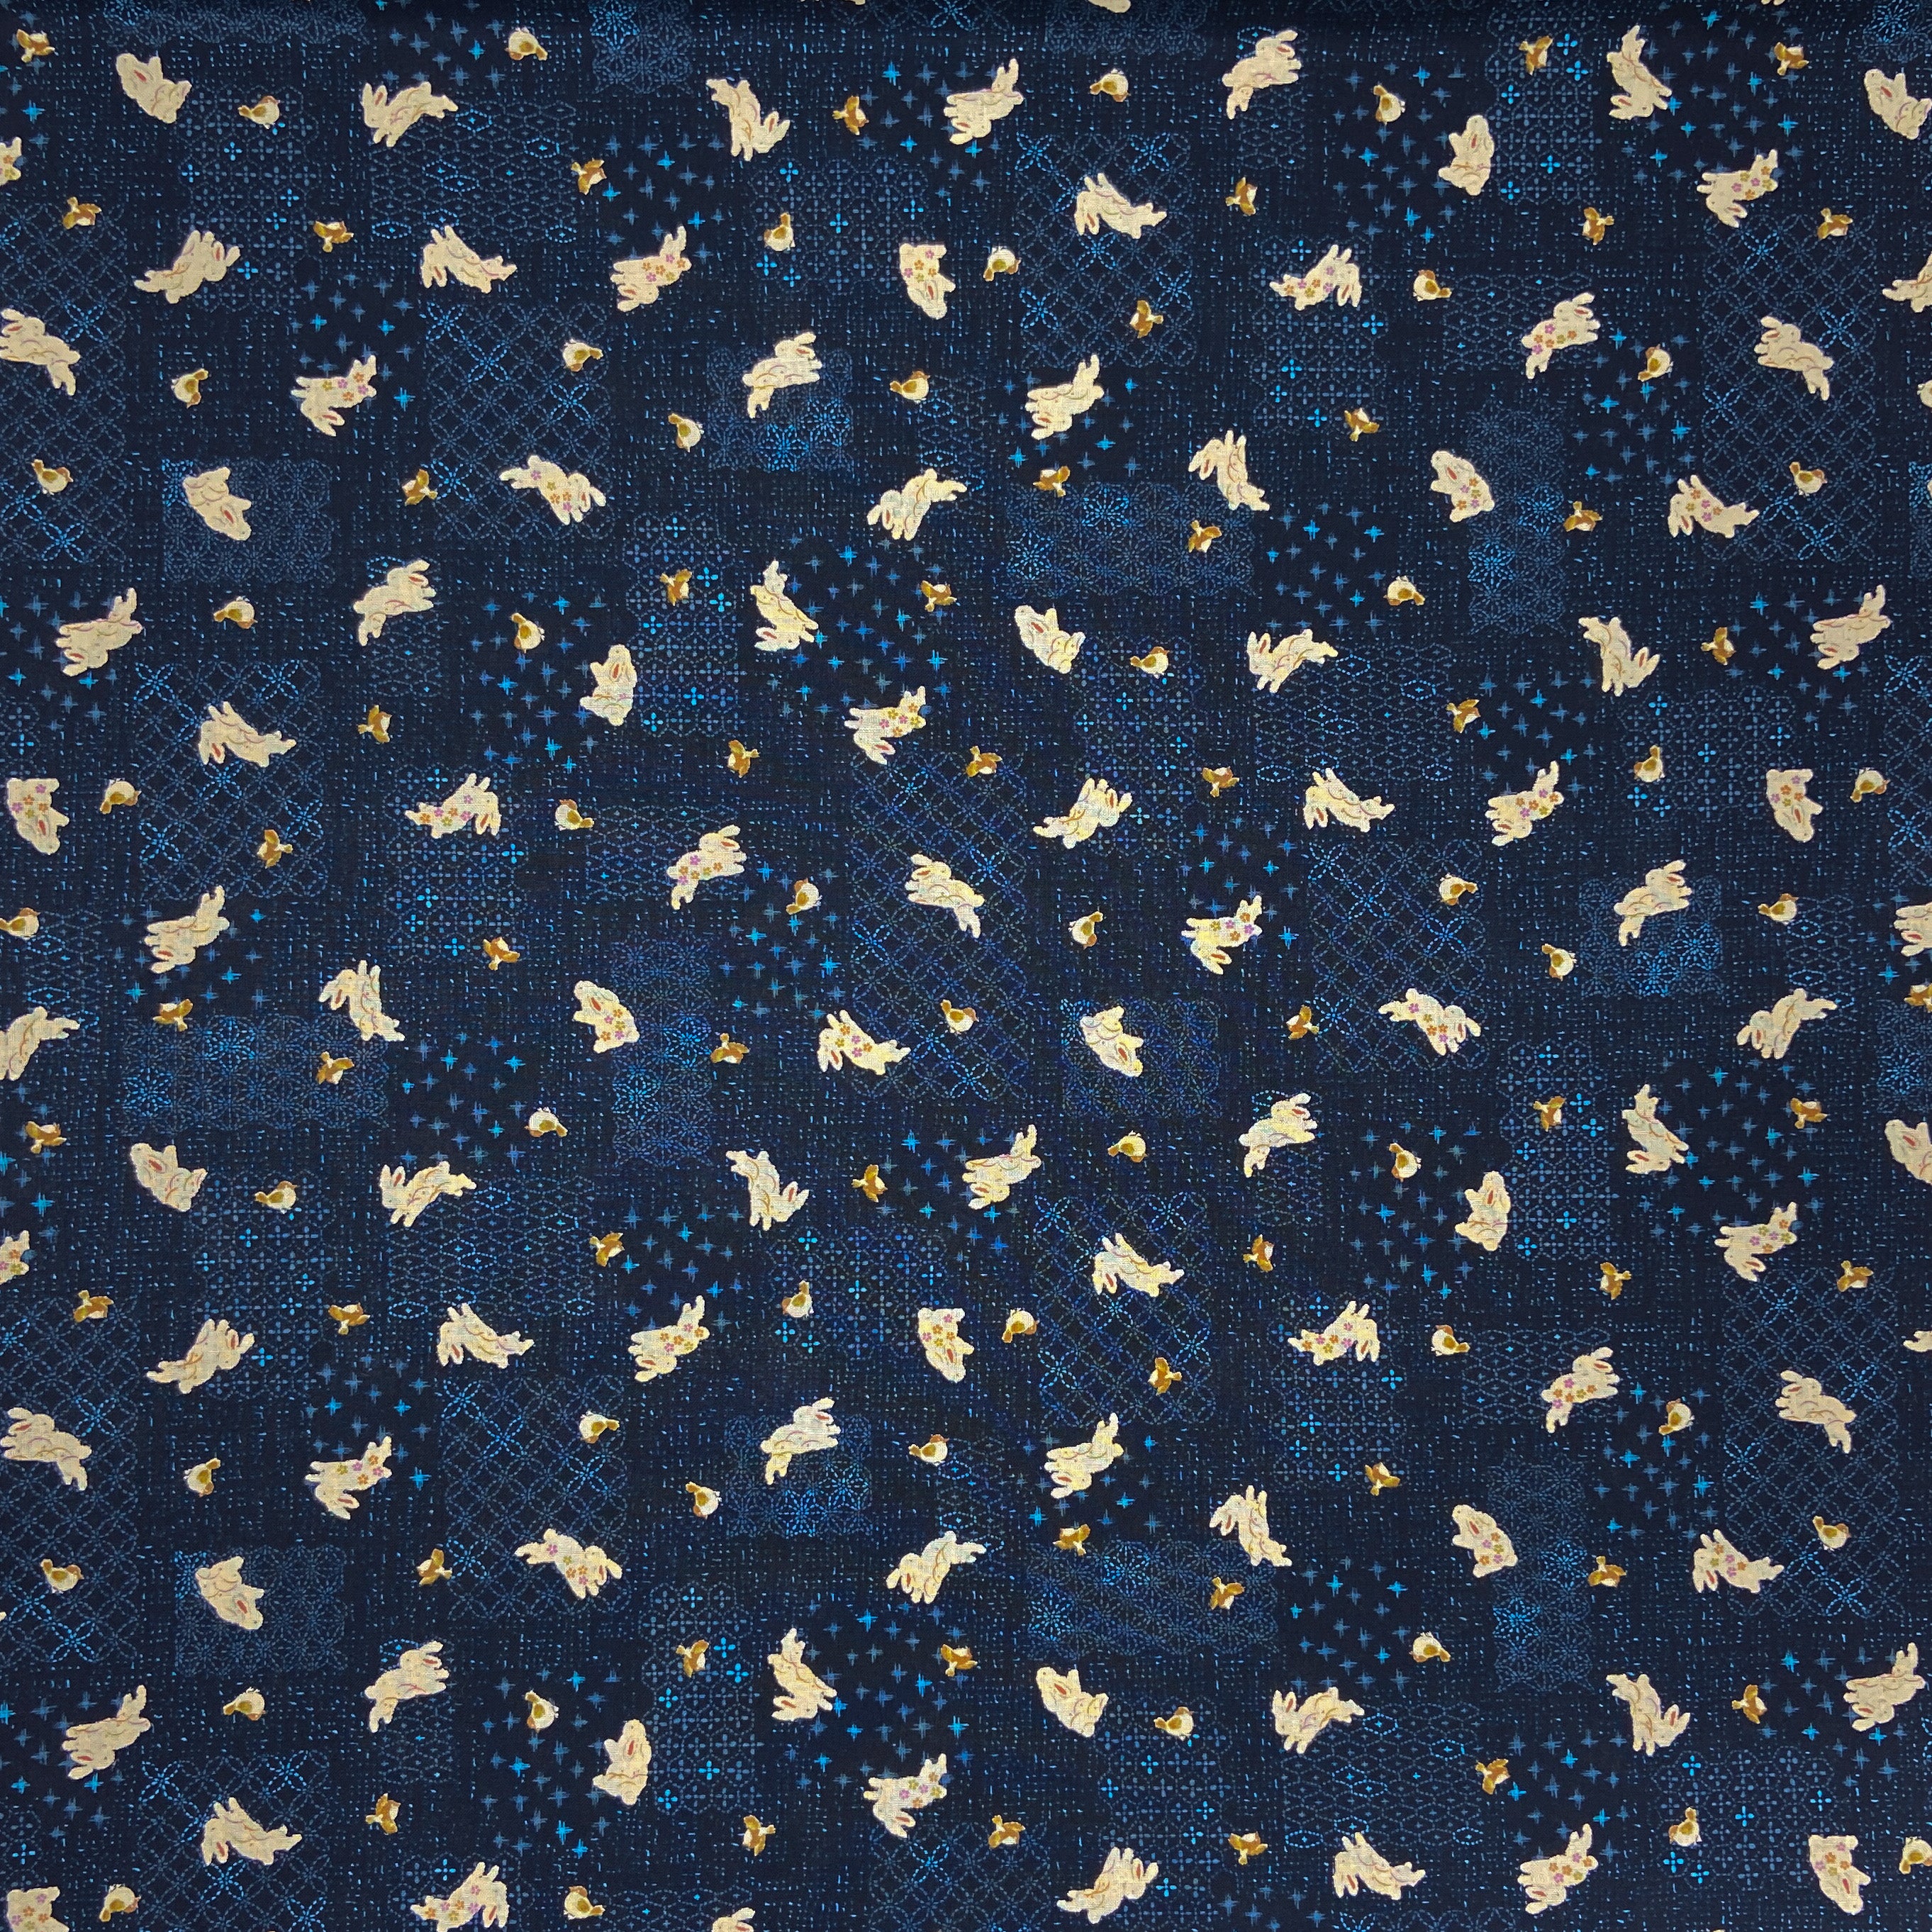 Japanese Cotton Sheeting Print - Rabbits Patches Navy